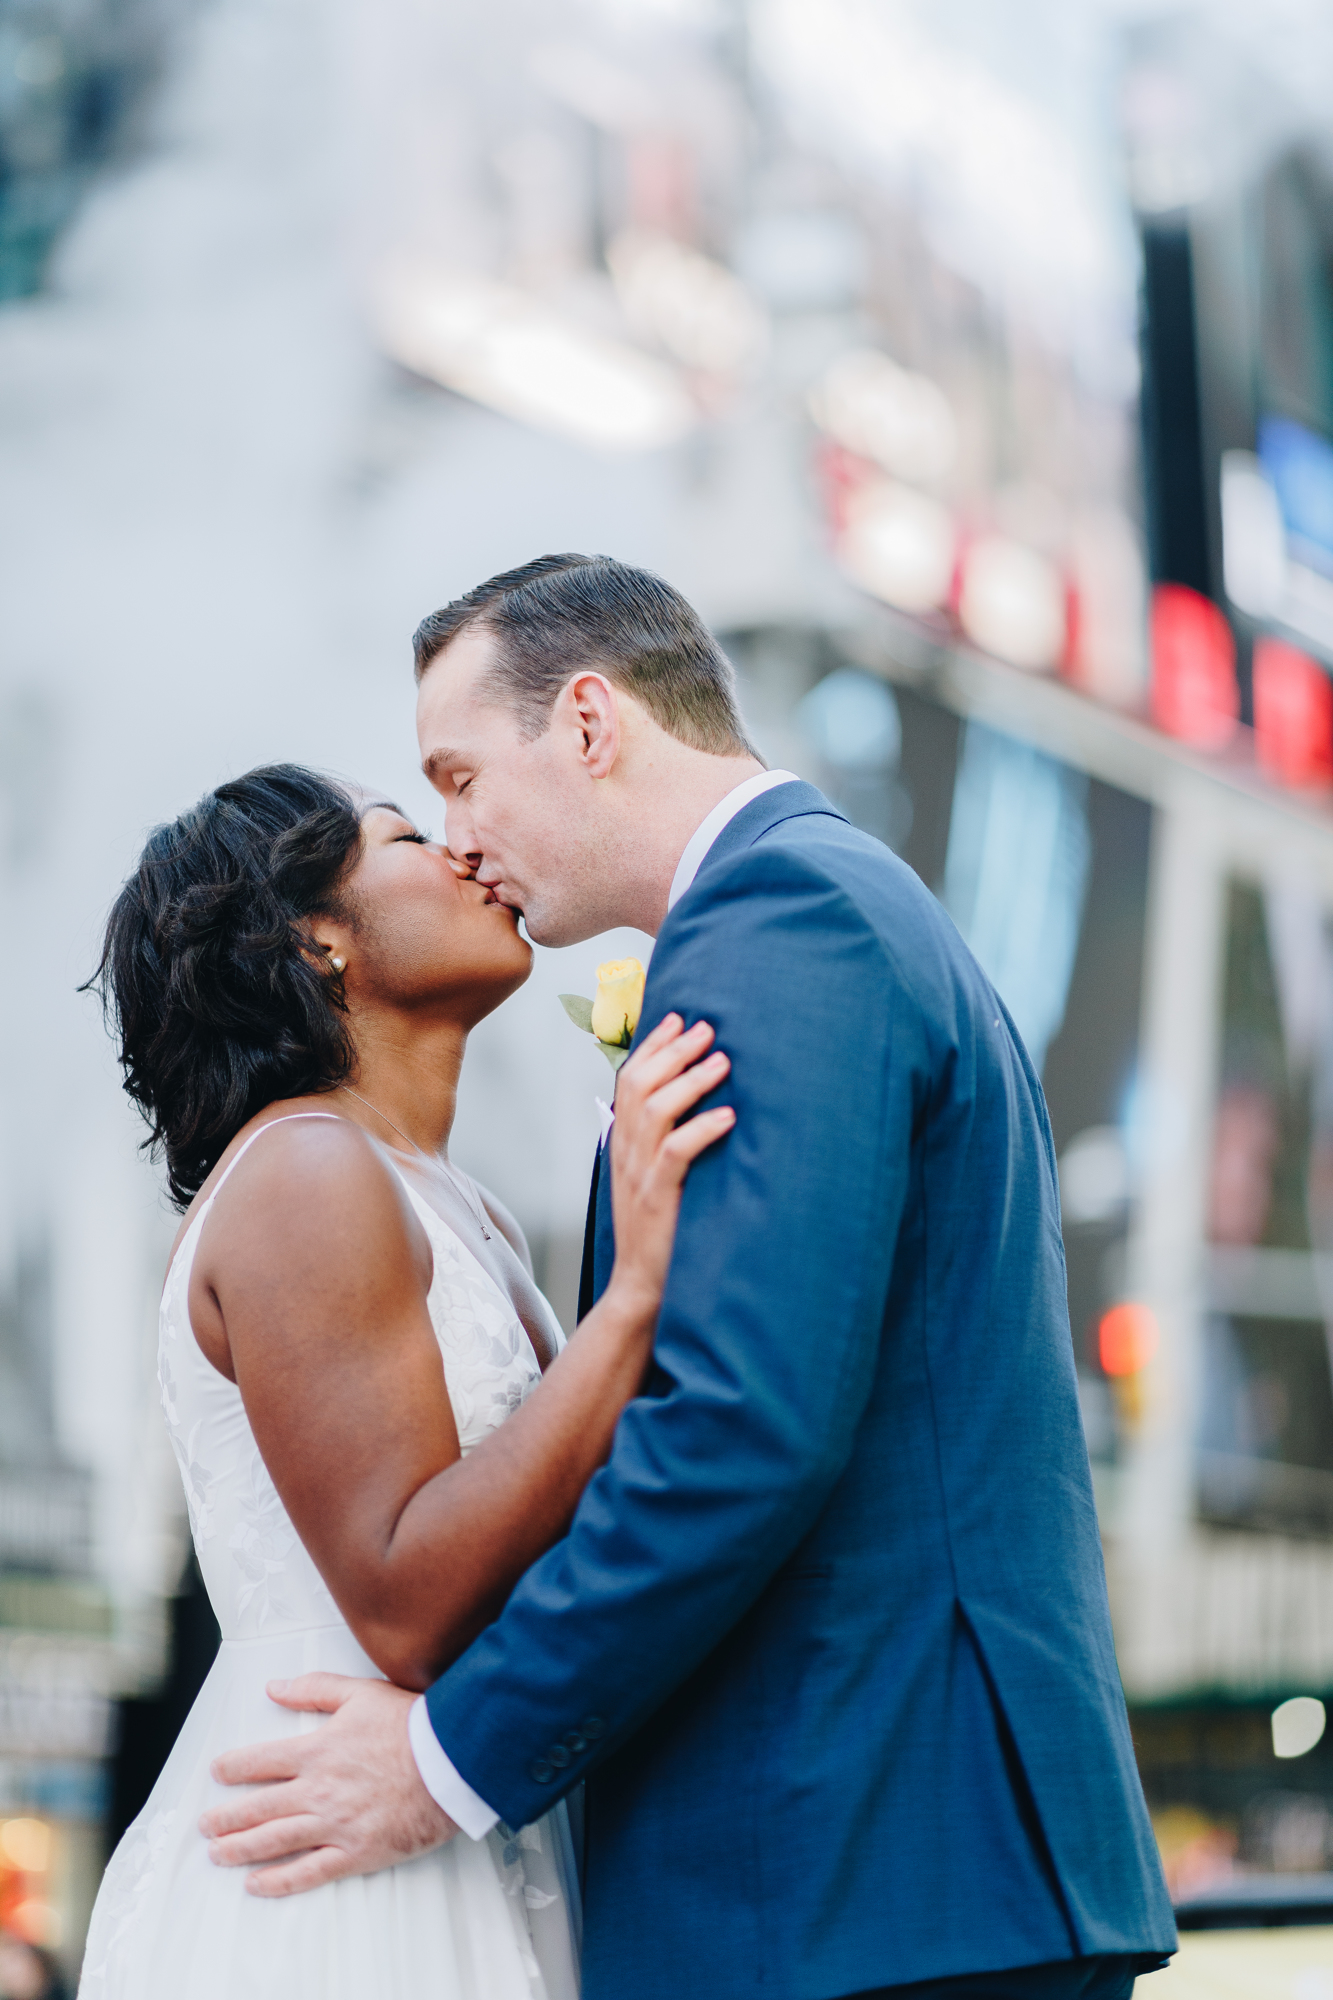 Beautiful NYC Engagement photo locations and ideas